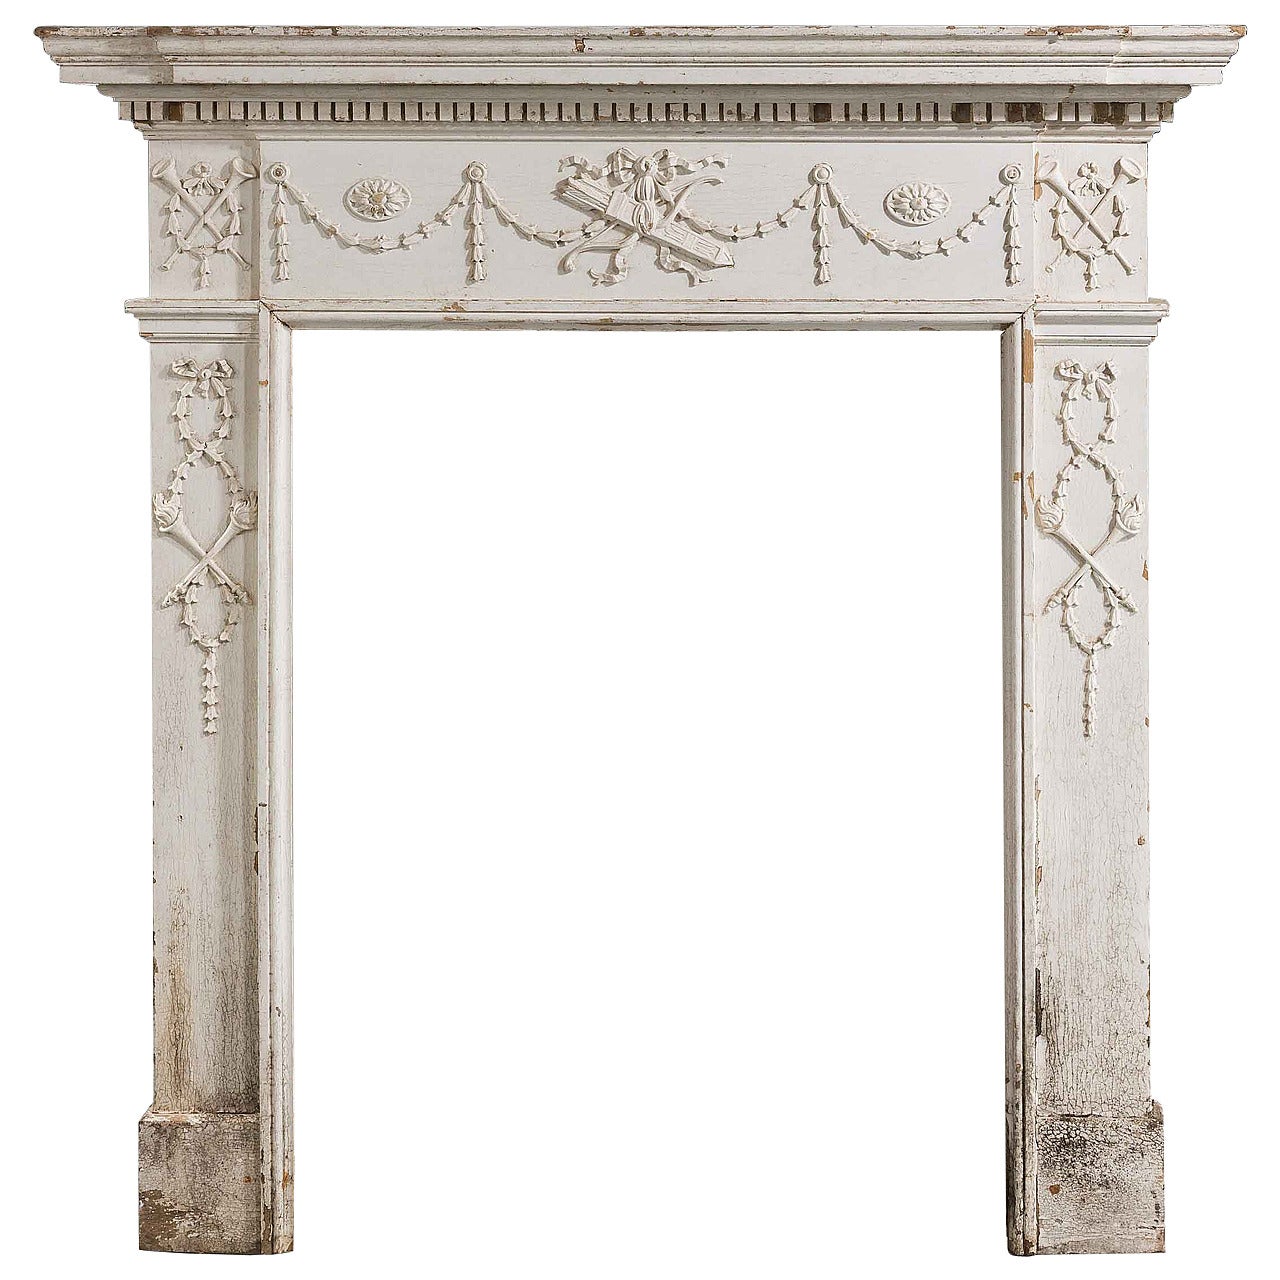 Late 19th Century Small Fire Surround